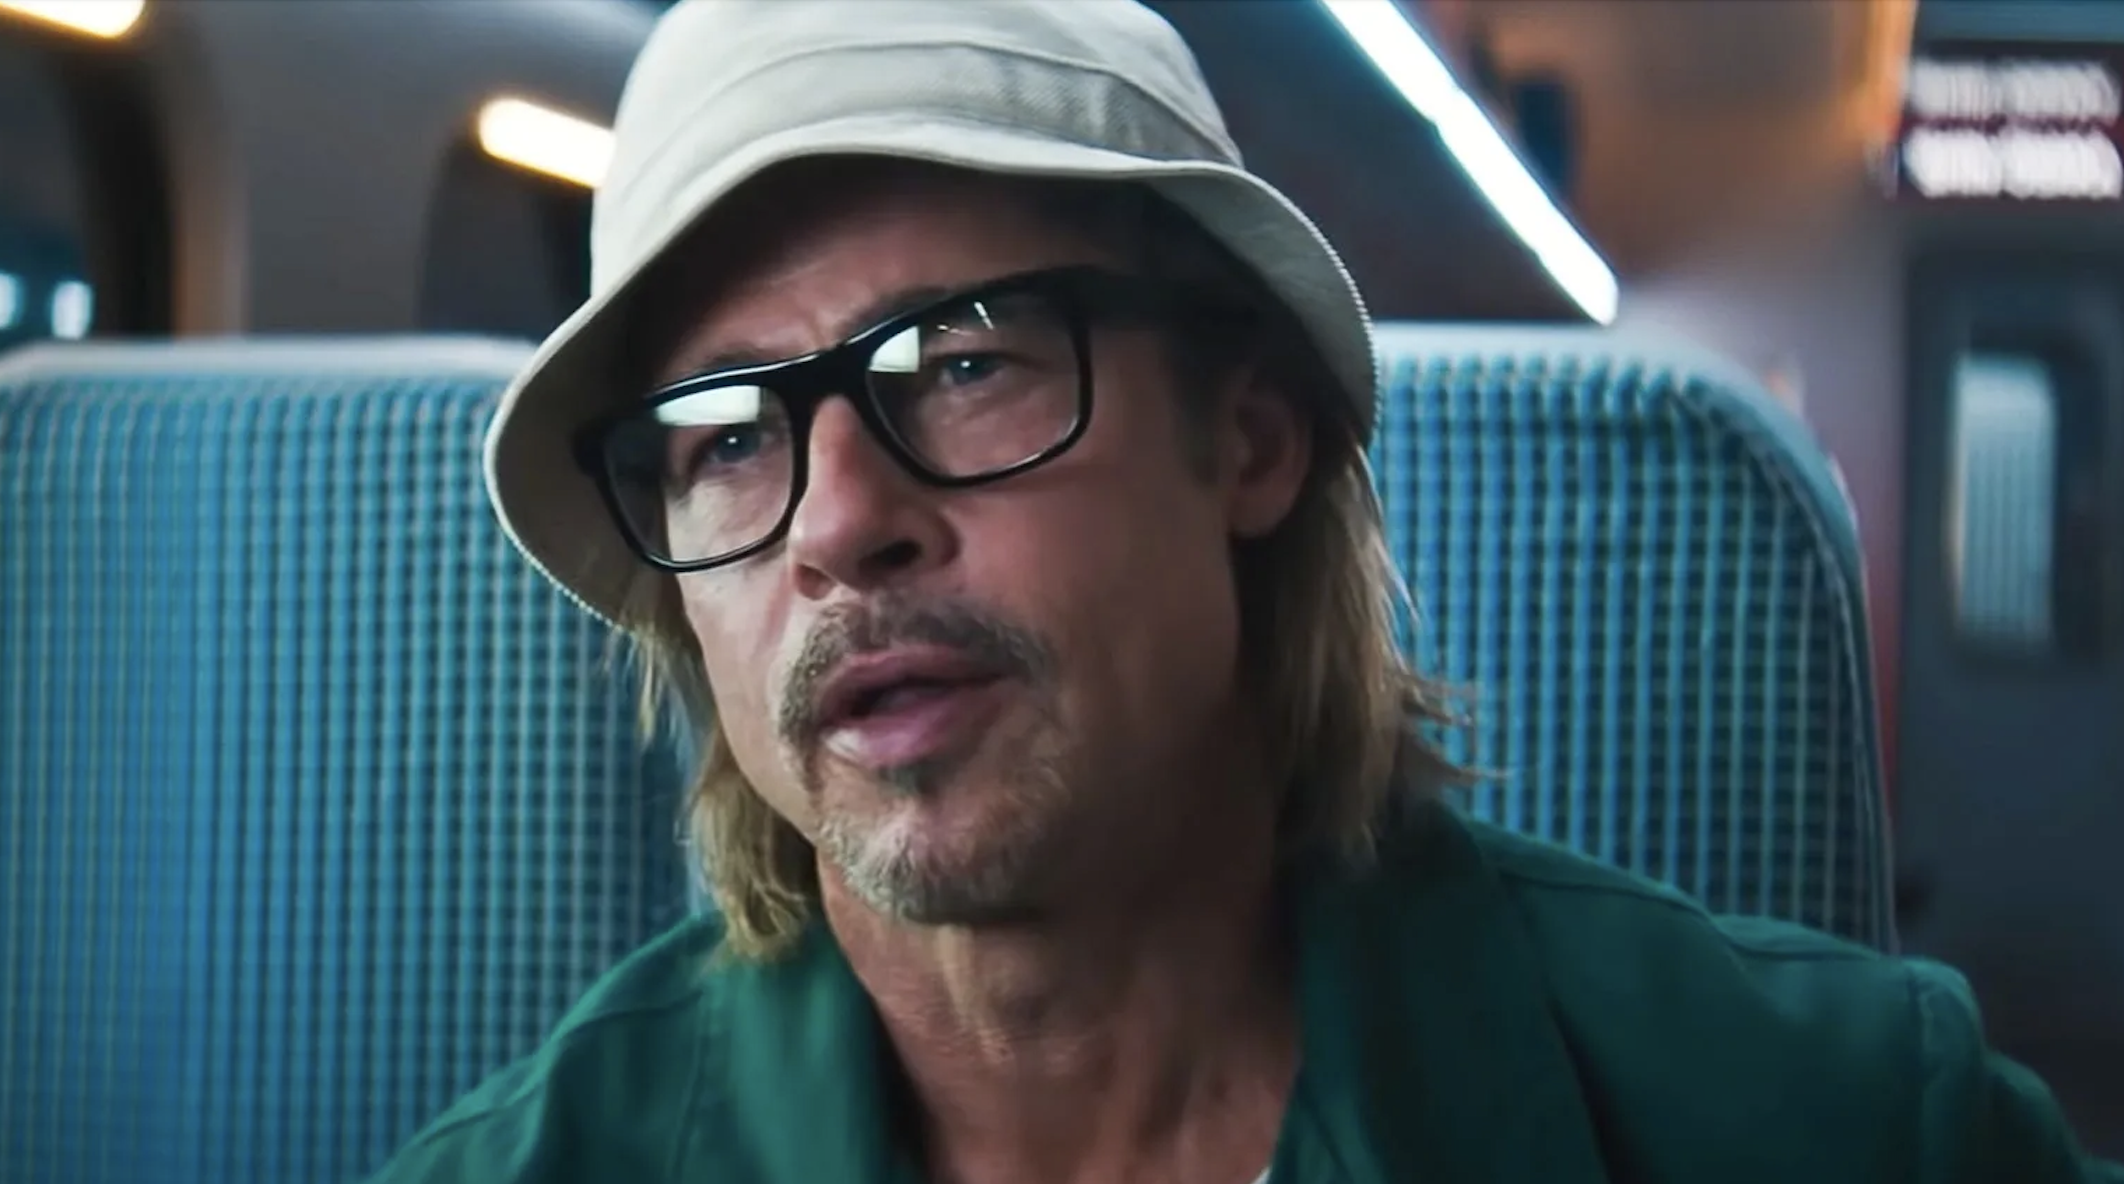 Brad Pitt as Ladybug sitting on a train in &quot;Bullet Train&quot;